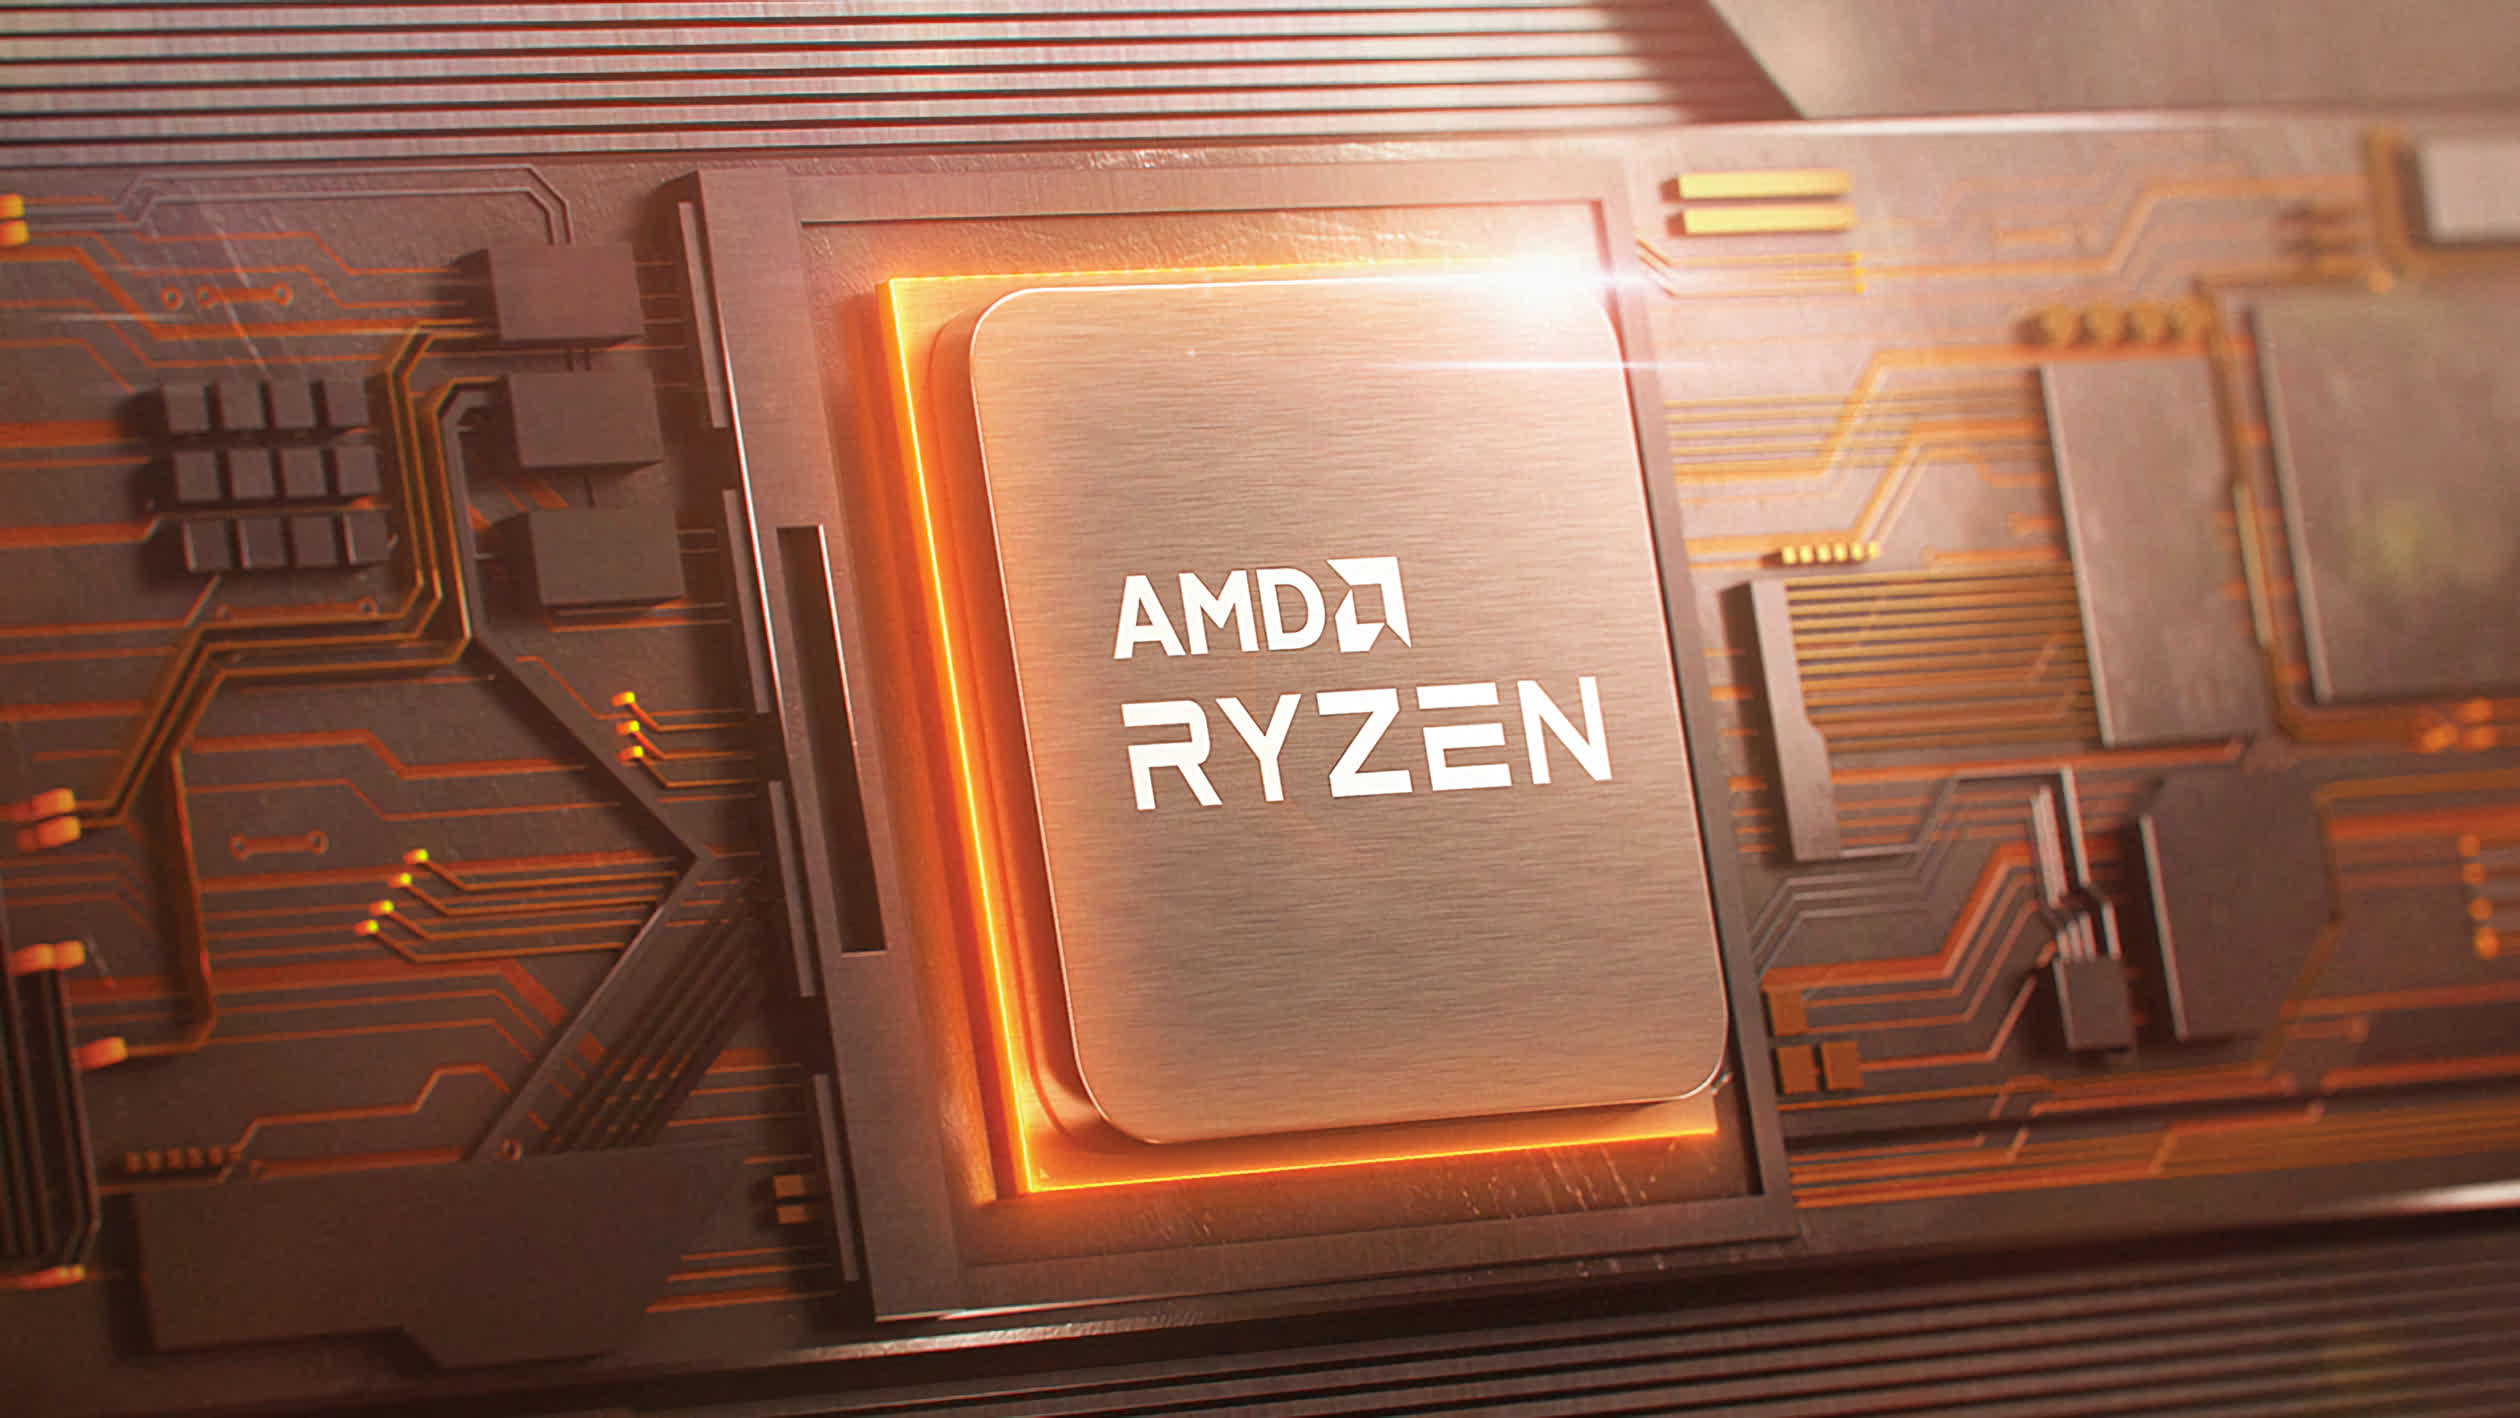 Ryzen 7000 series CPUs to feature RDNA 2 iGPU clocked at 1.1GHz